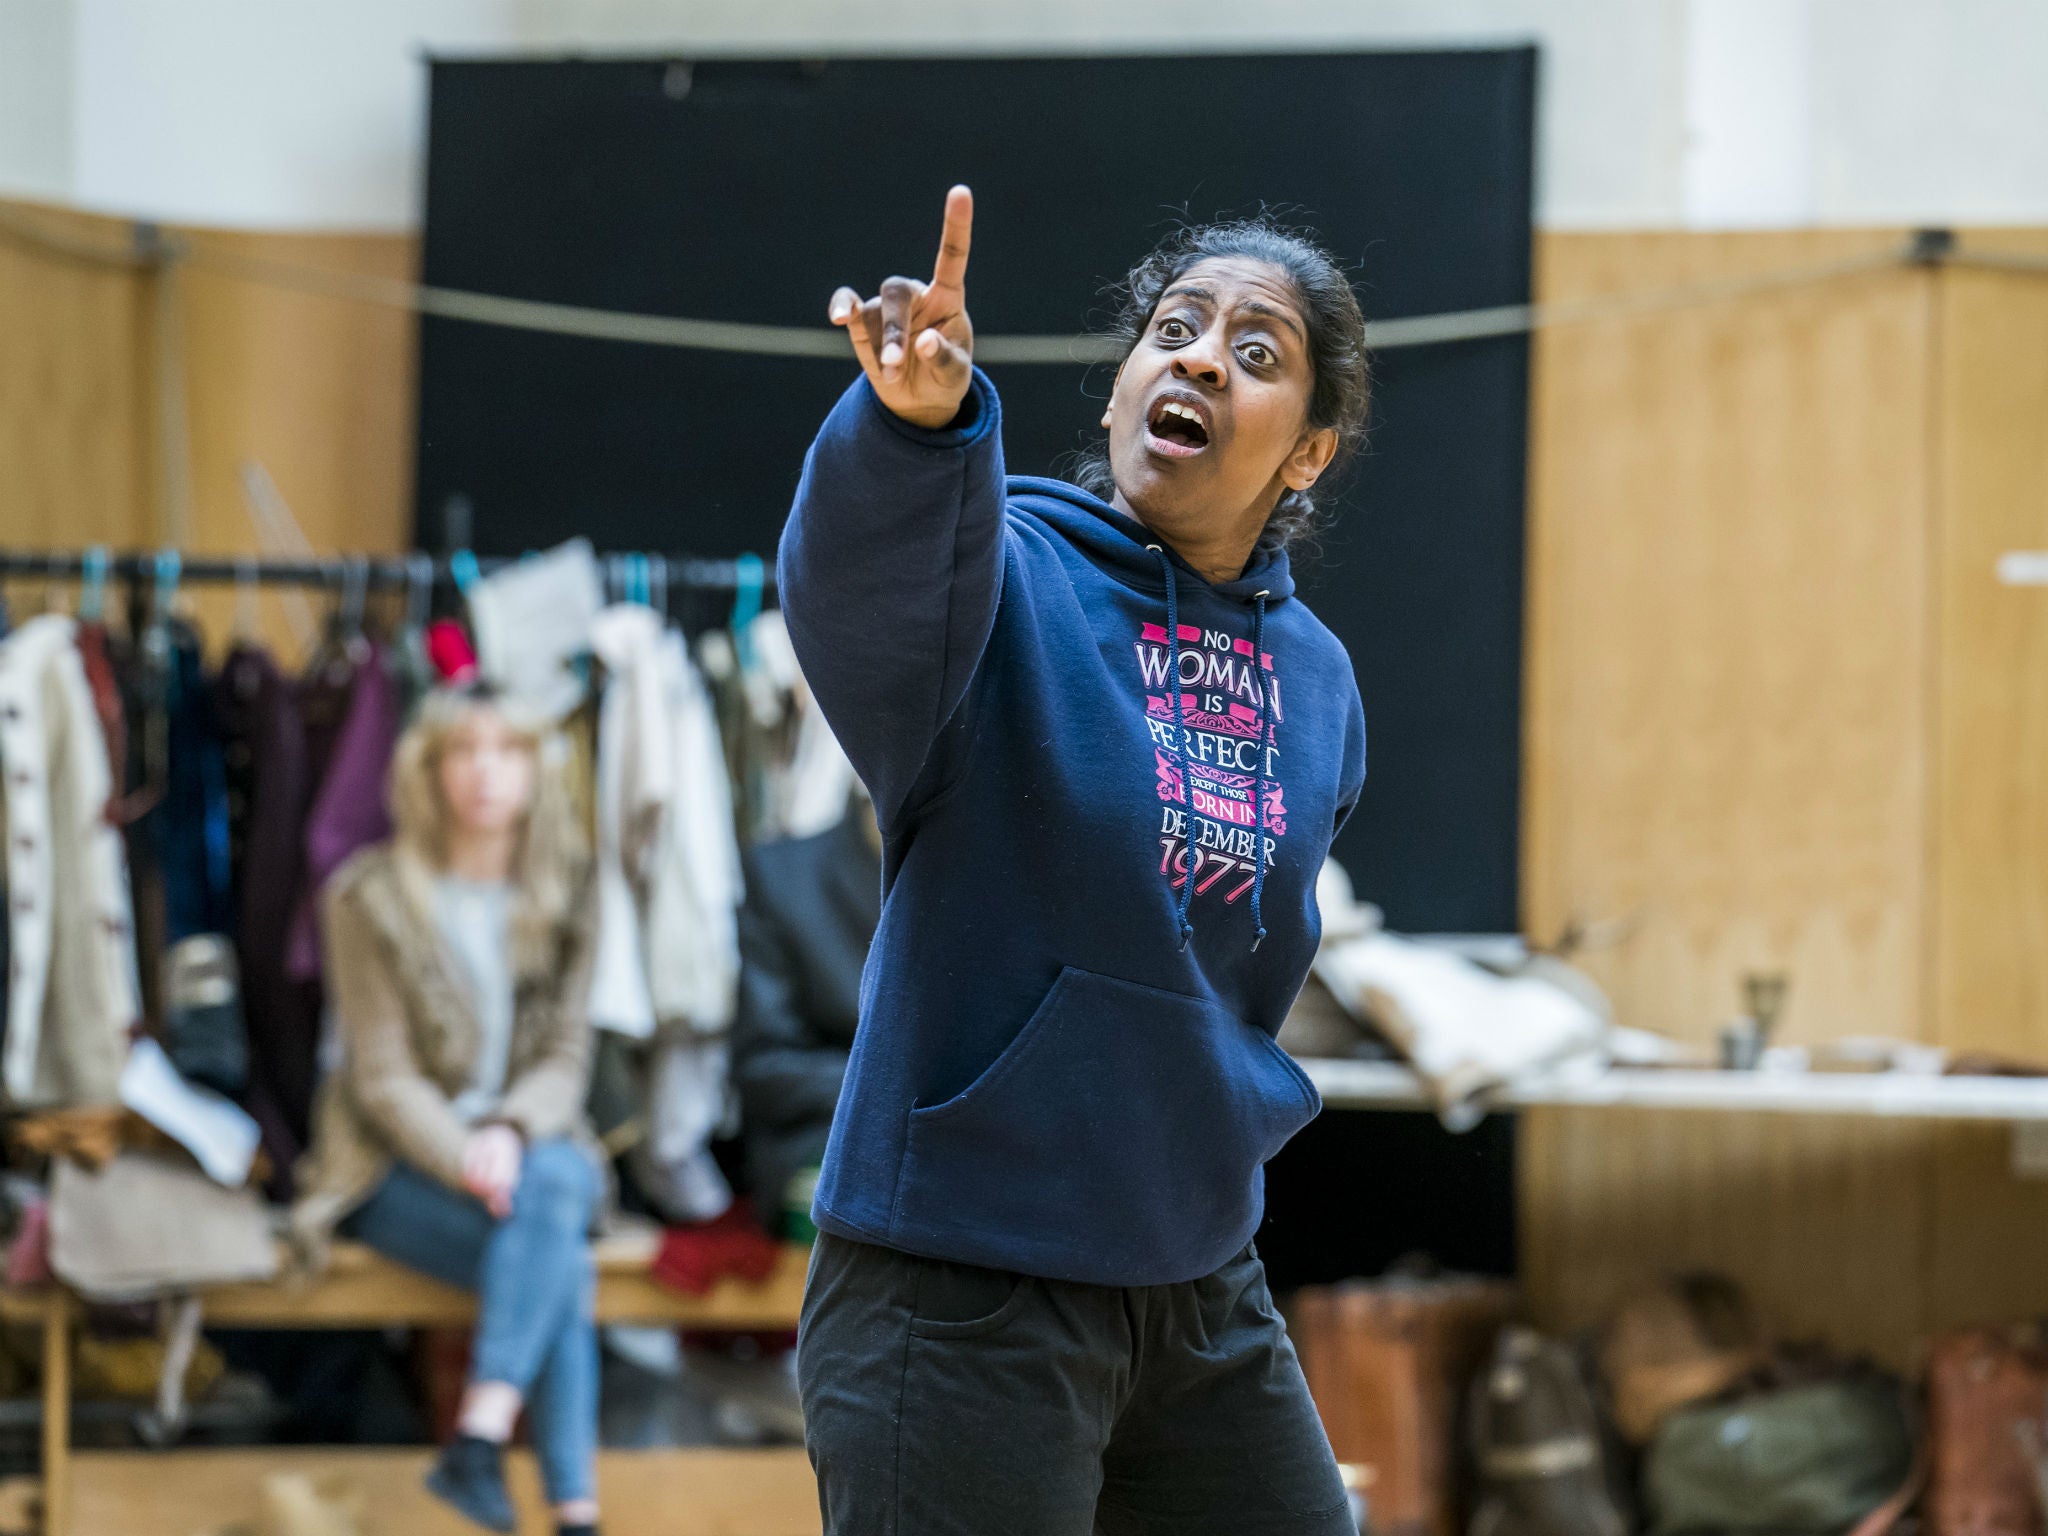 Nadia Nadarajah, a D/deaf actor, rehearses for ‘Hamlet’: ‘It’s about me trusting the hearing actors and them trusting me’